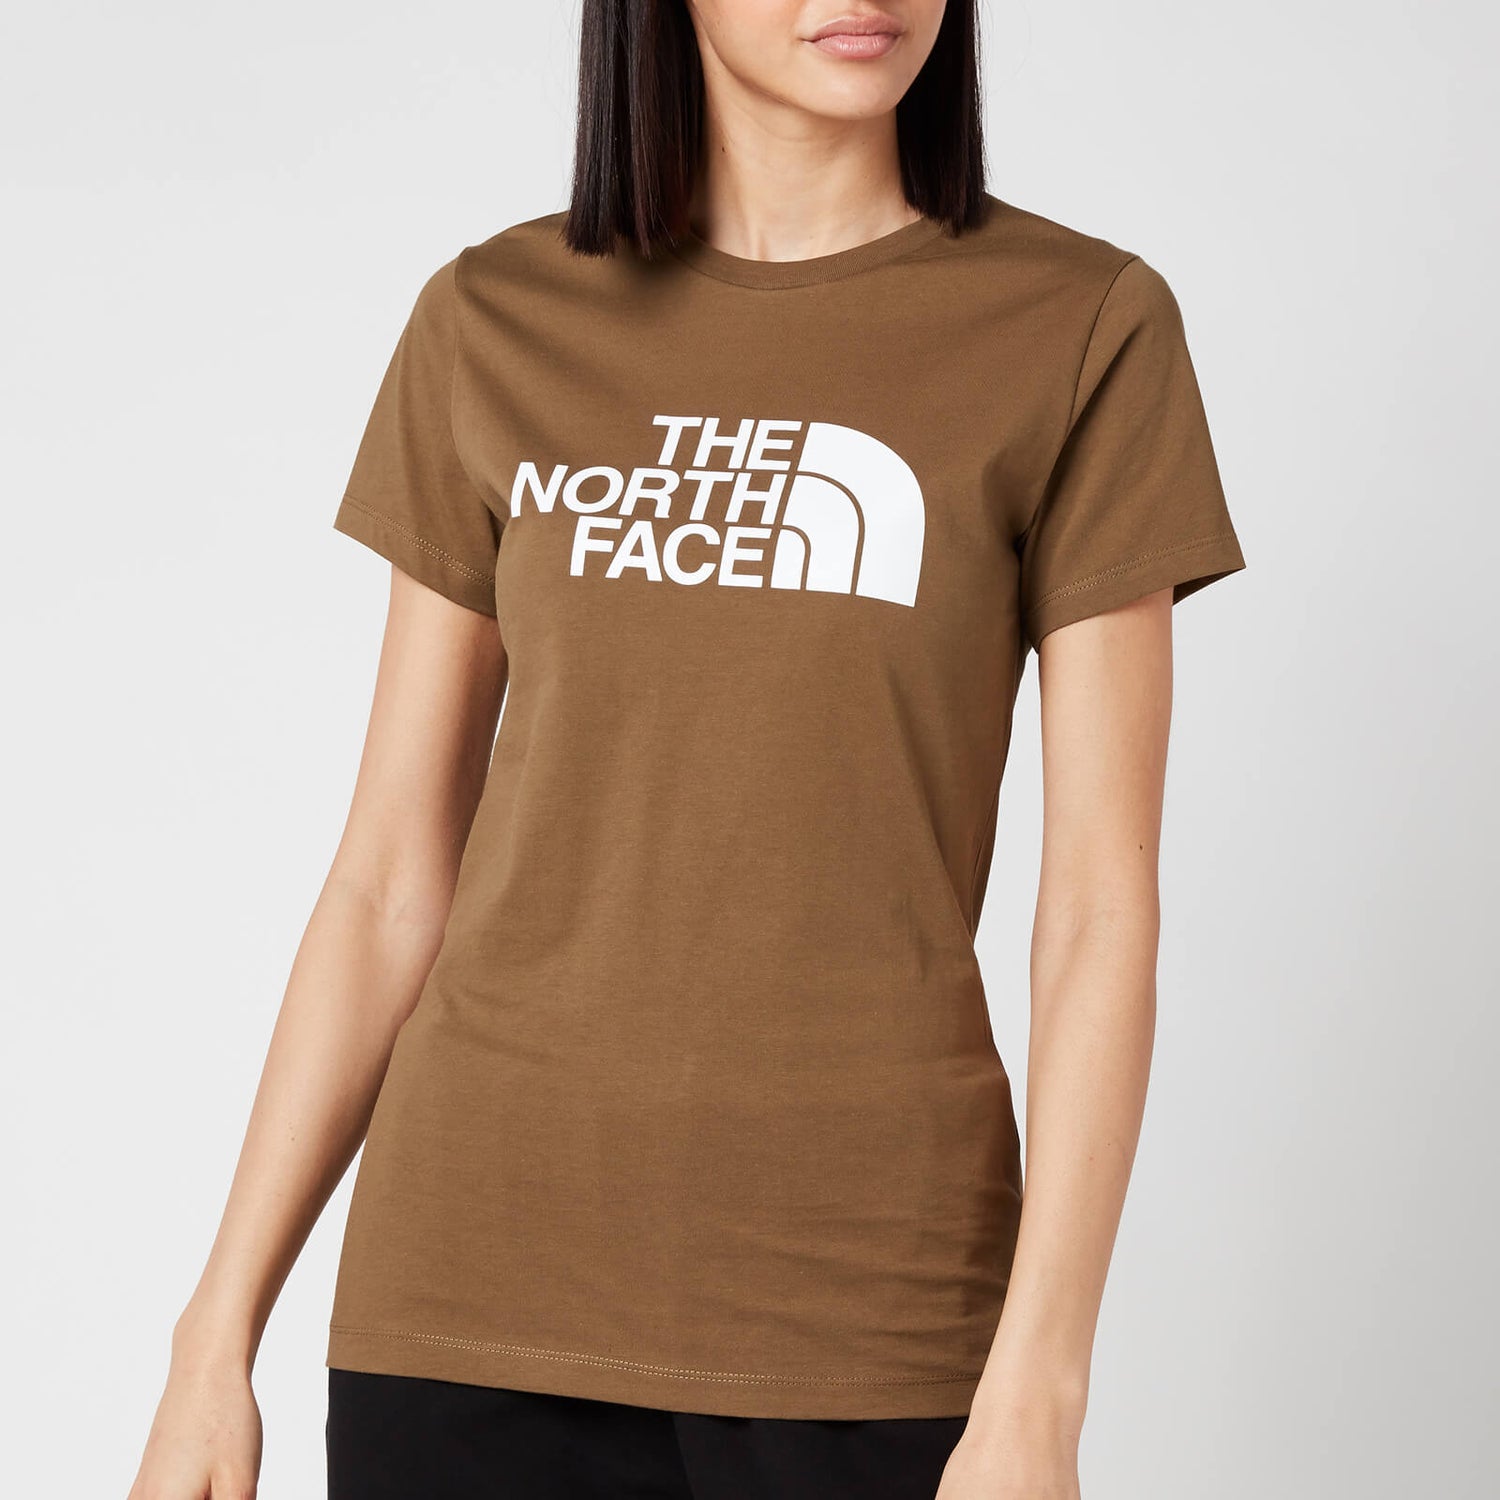 The North Face Women's Easy Short Sleeve T-Shirt - Military Olive